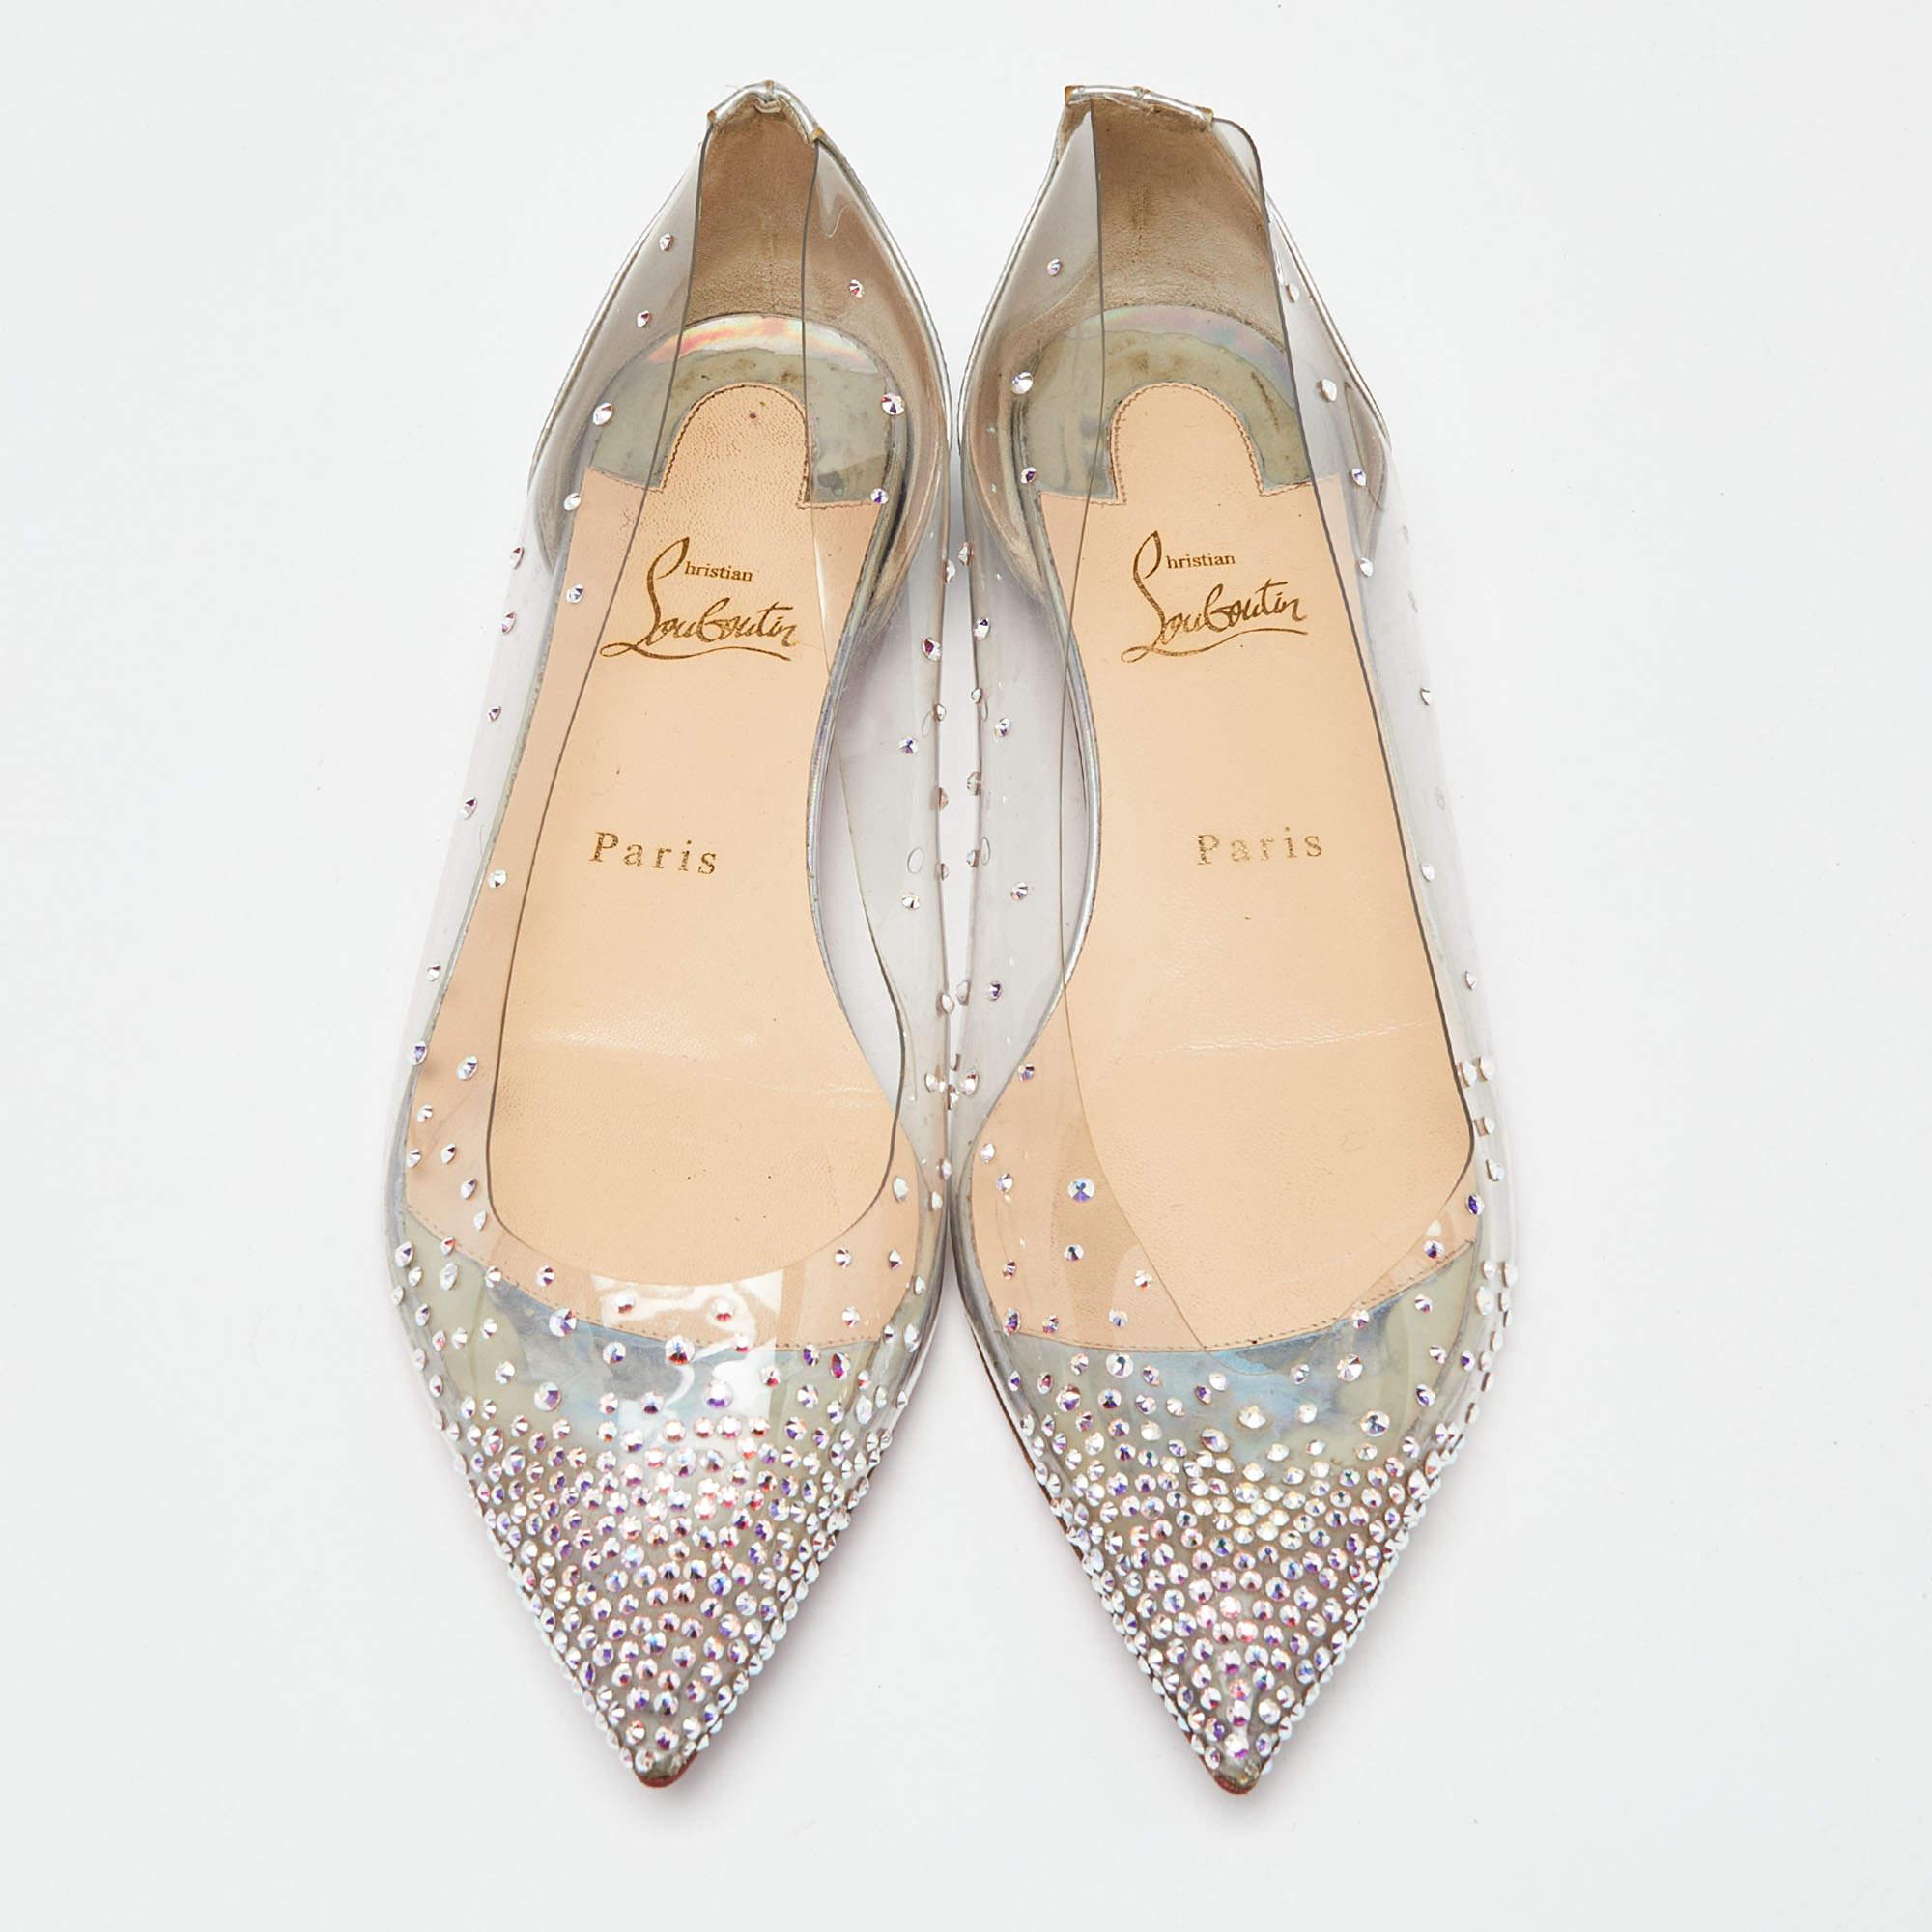 Be ready for constant attention and admirable gasps from your audience when you walk in these flats from Christian Louboutin. Crafted from transparent PVC and patent leather, they carry pointed toes, and crystals decorated all over. The pair is